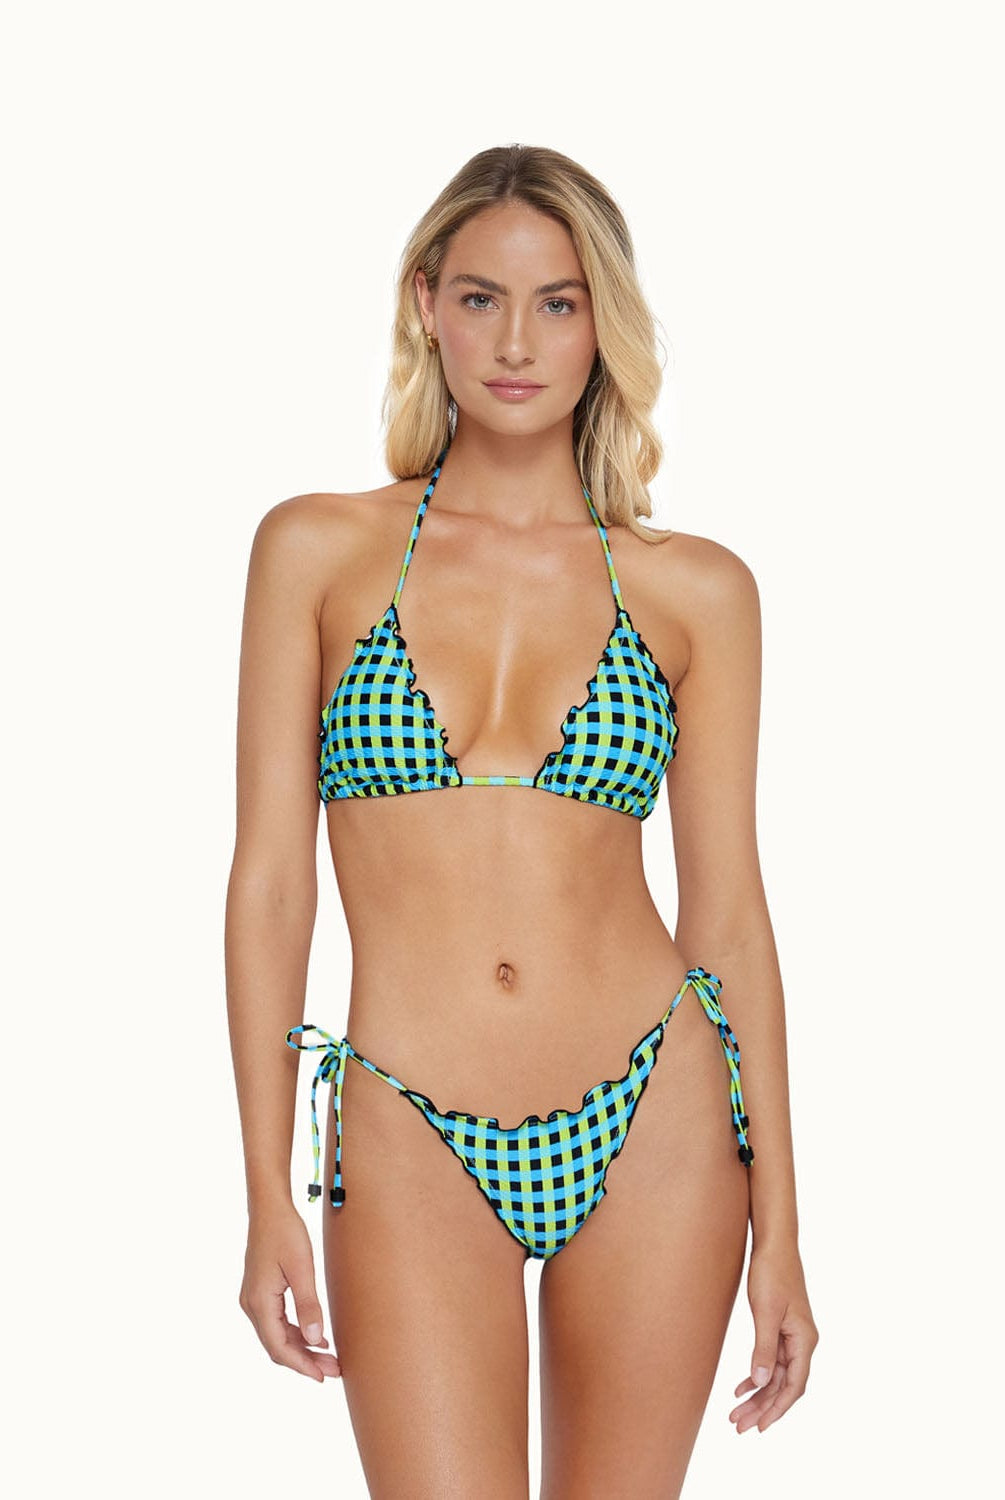 A blonde woman wearing a blue and green checkered bikini stands against a white wall. 